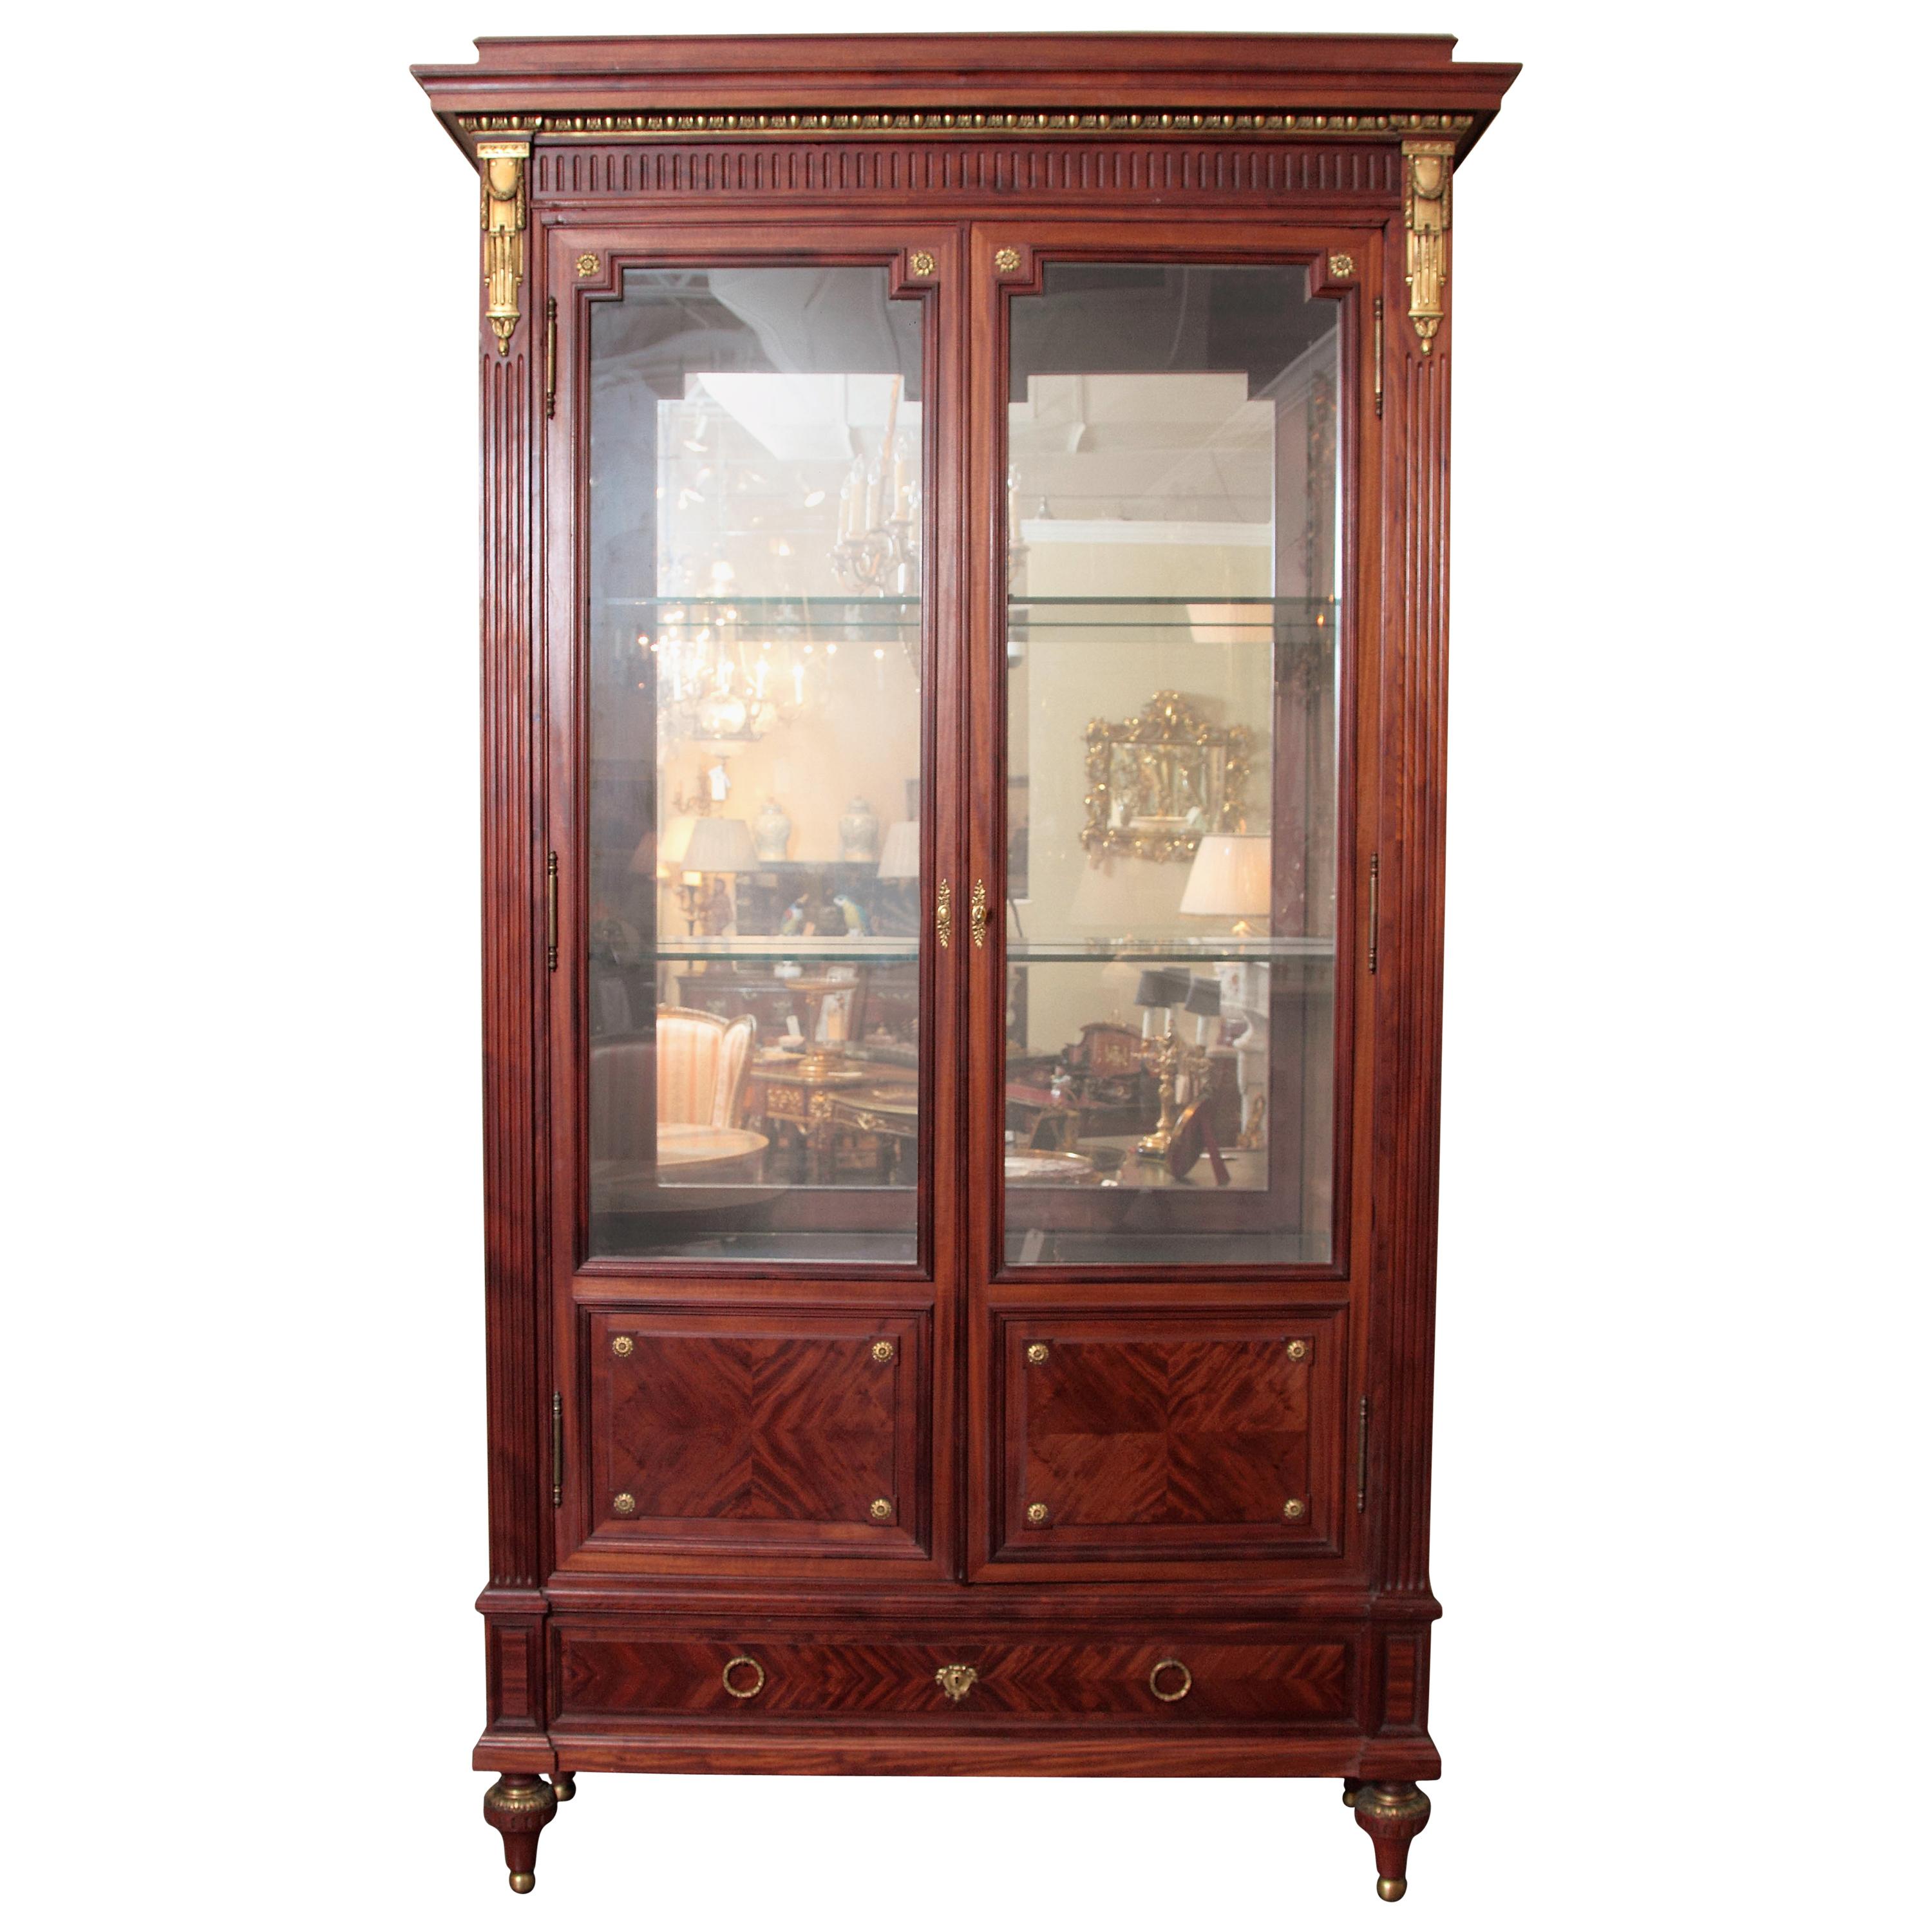 Large Very Fine Mahogany French Louis XVI Viewing Cabinet by P. Sormani